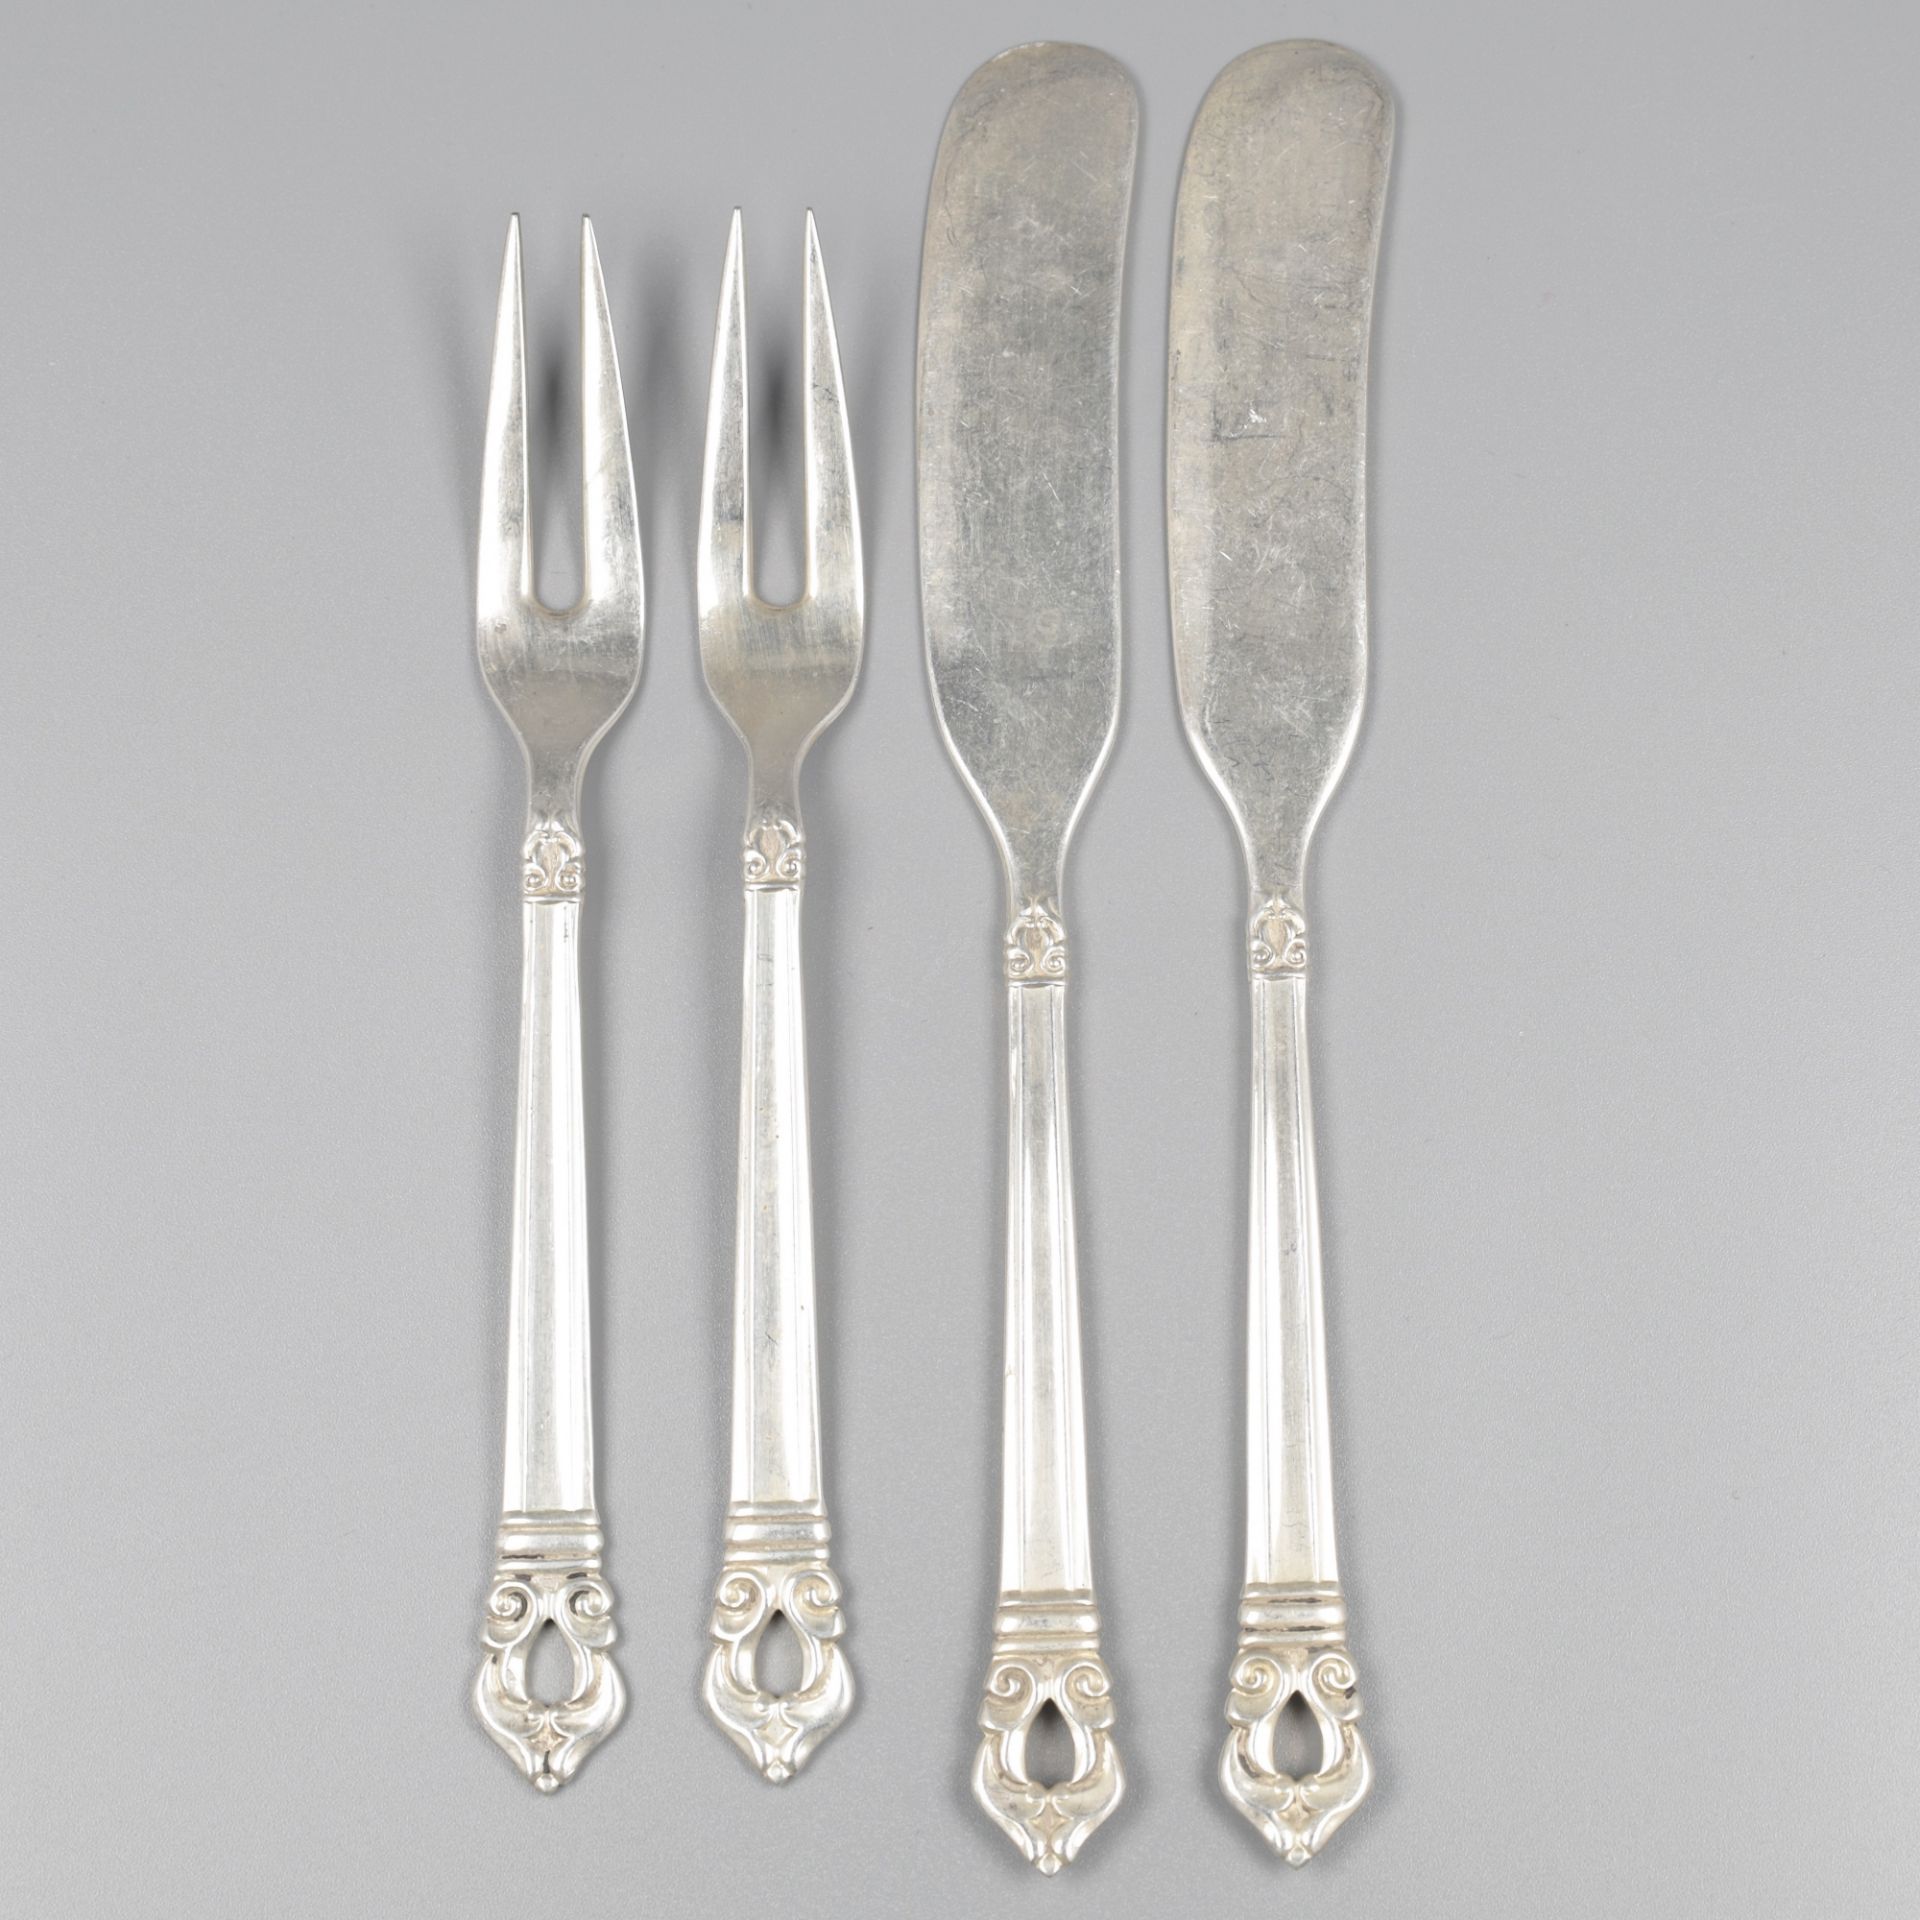 Carving forks and butter knives (4), model Royal Danish at Codan S.A. (Mexico), silver.